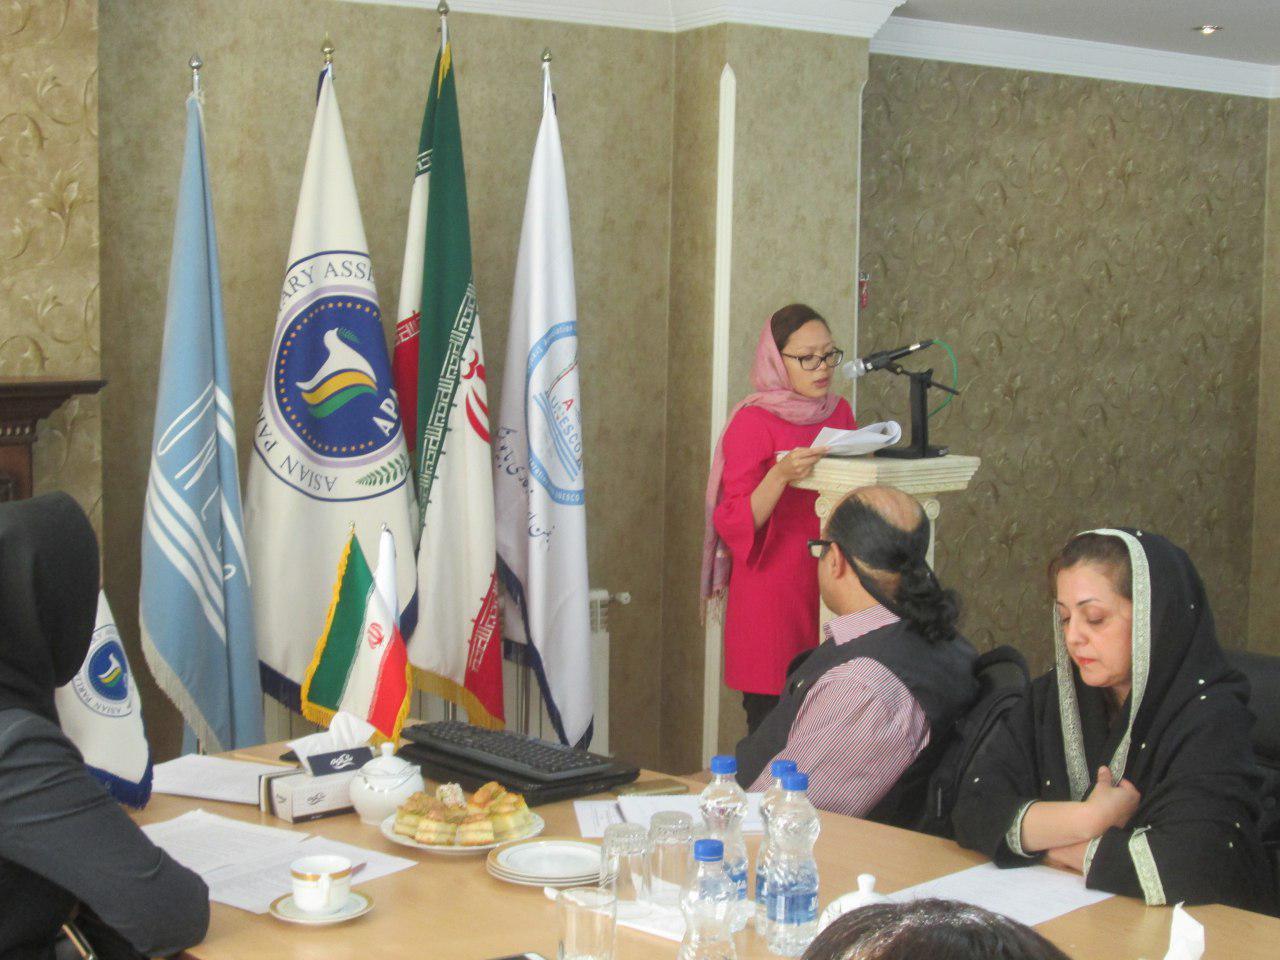 Ms. Mary Anne Therese Manuson, representative of Ms. Esther Kuisch Laroche, Director of UNESCO's Tehran Cluster Office, addresses the meeting.